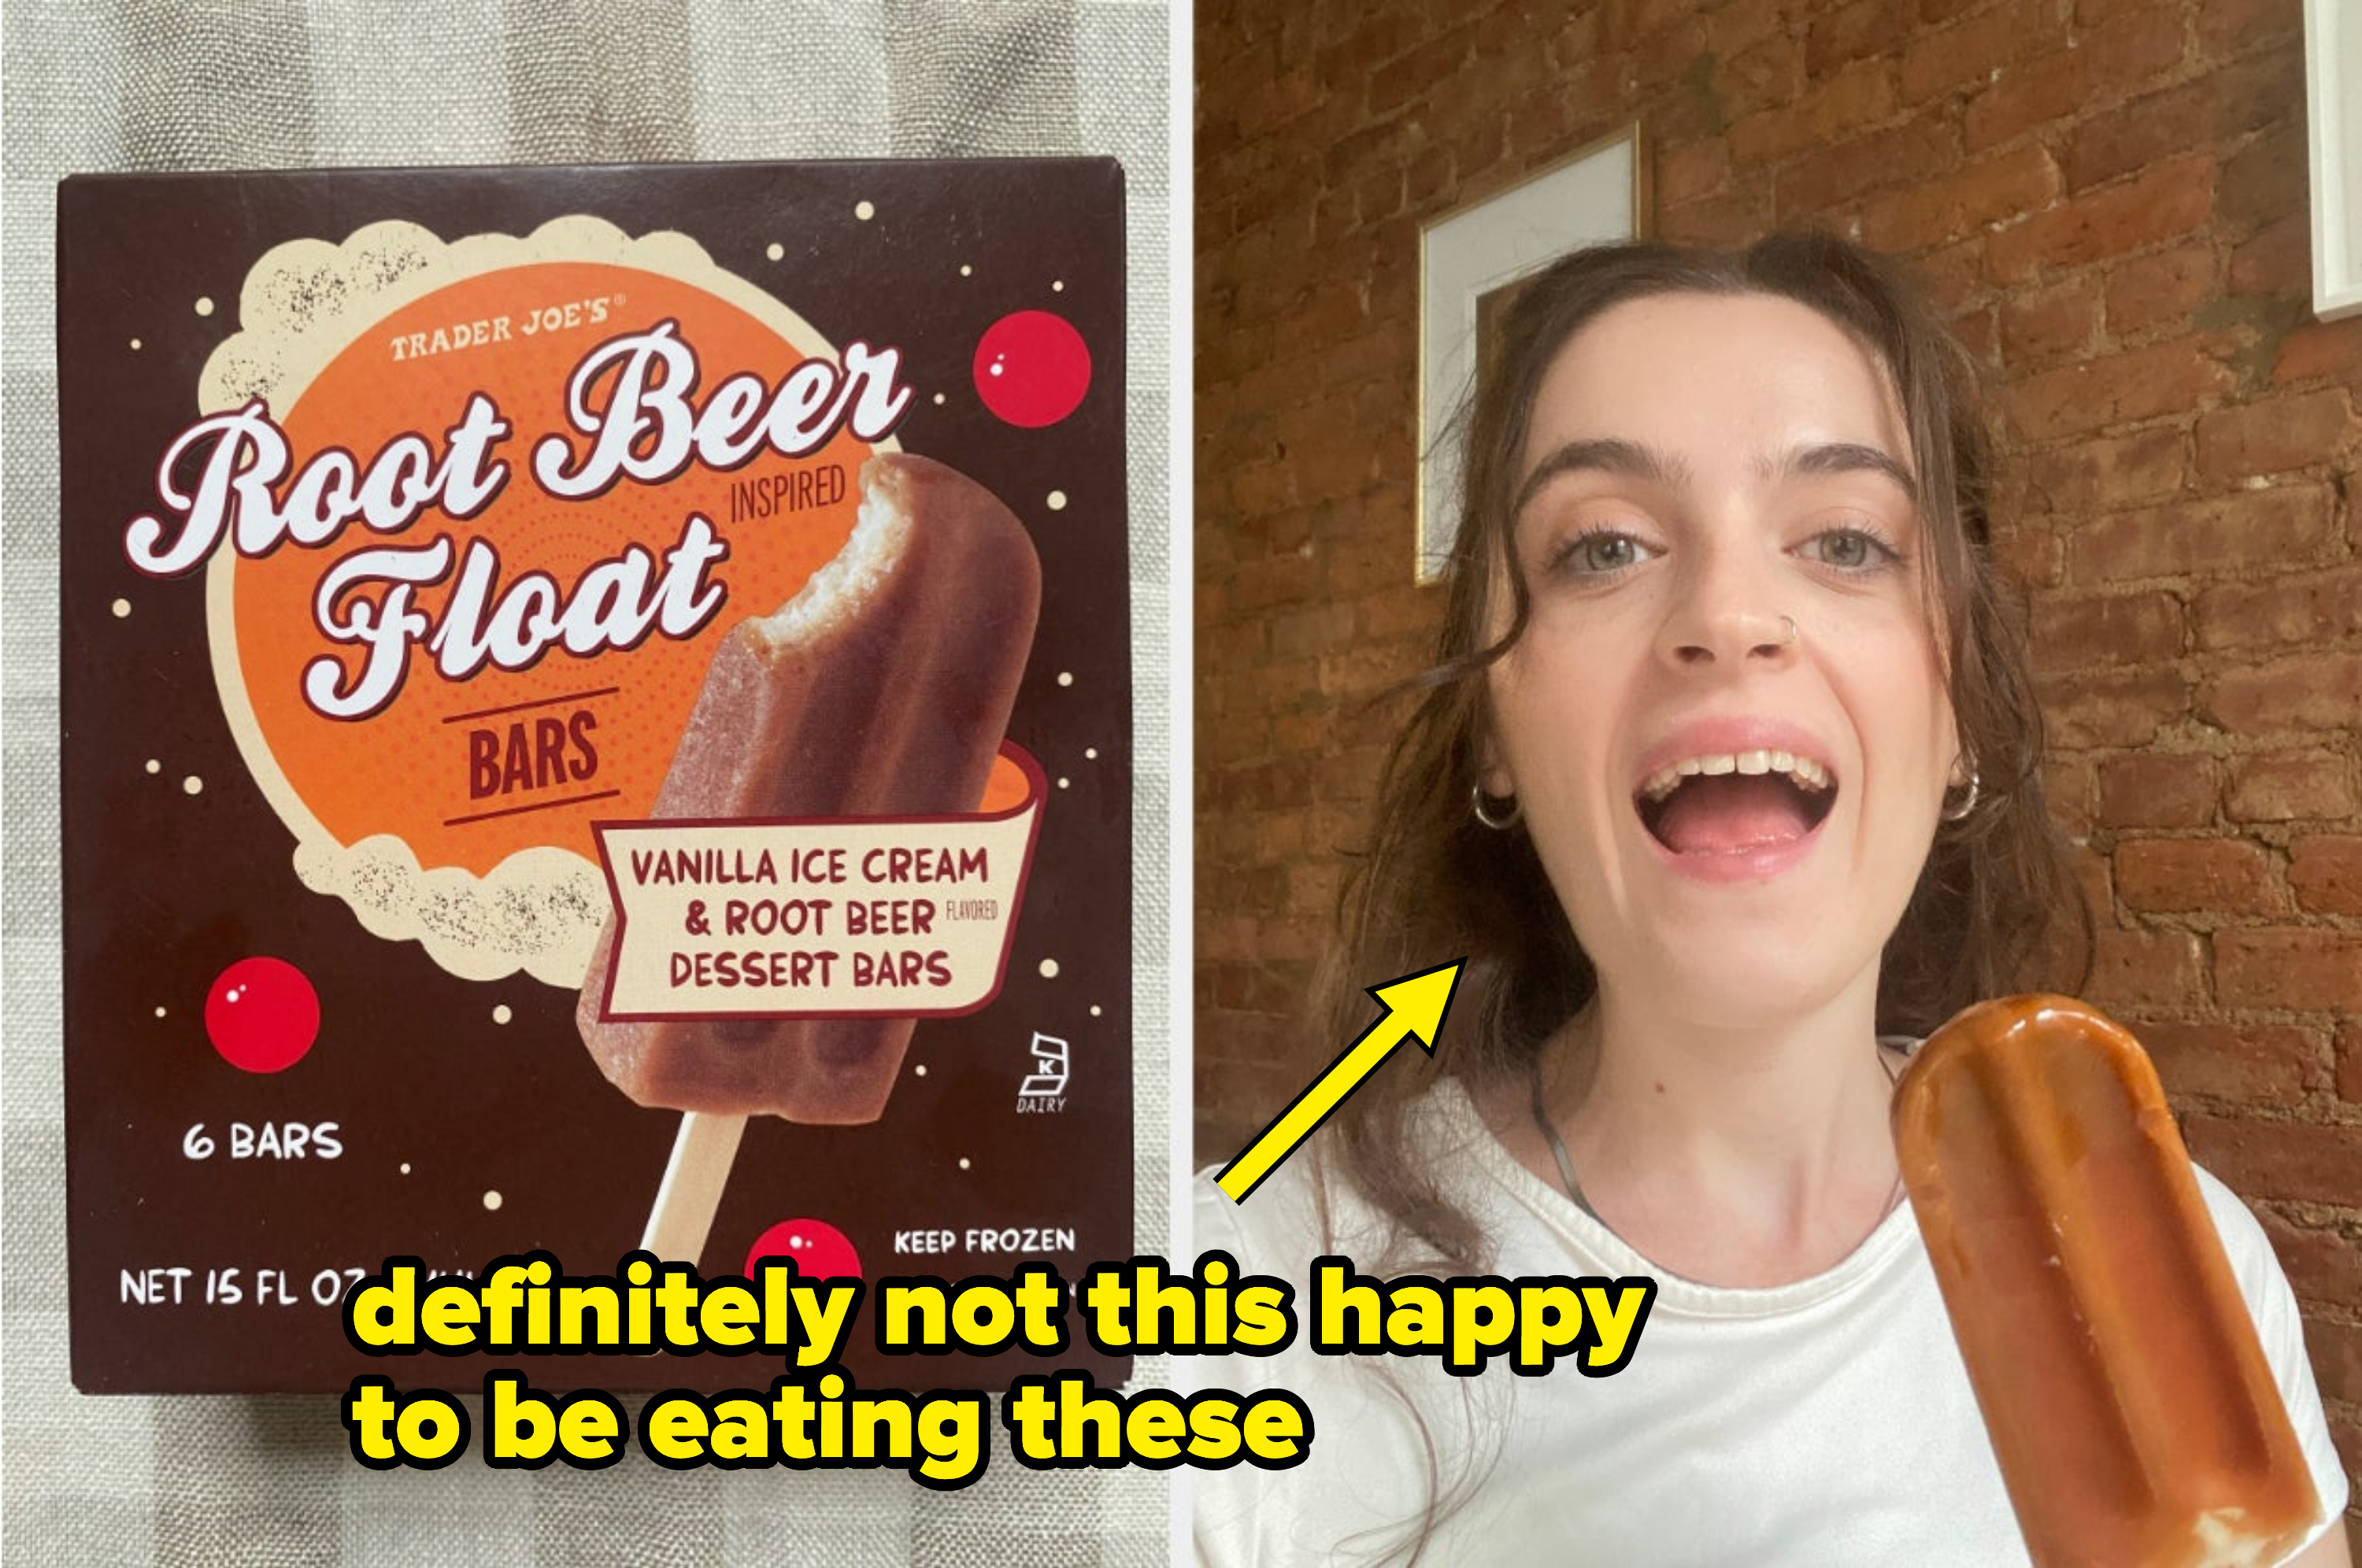 a box of root beer float bars and claudia holding one of the bars